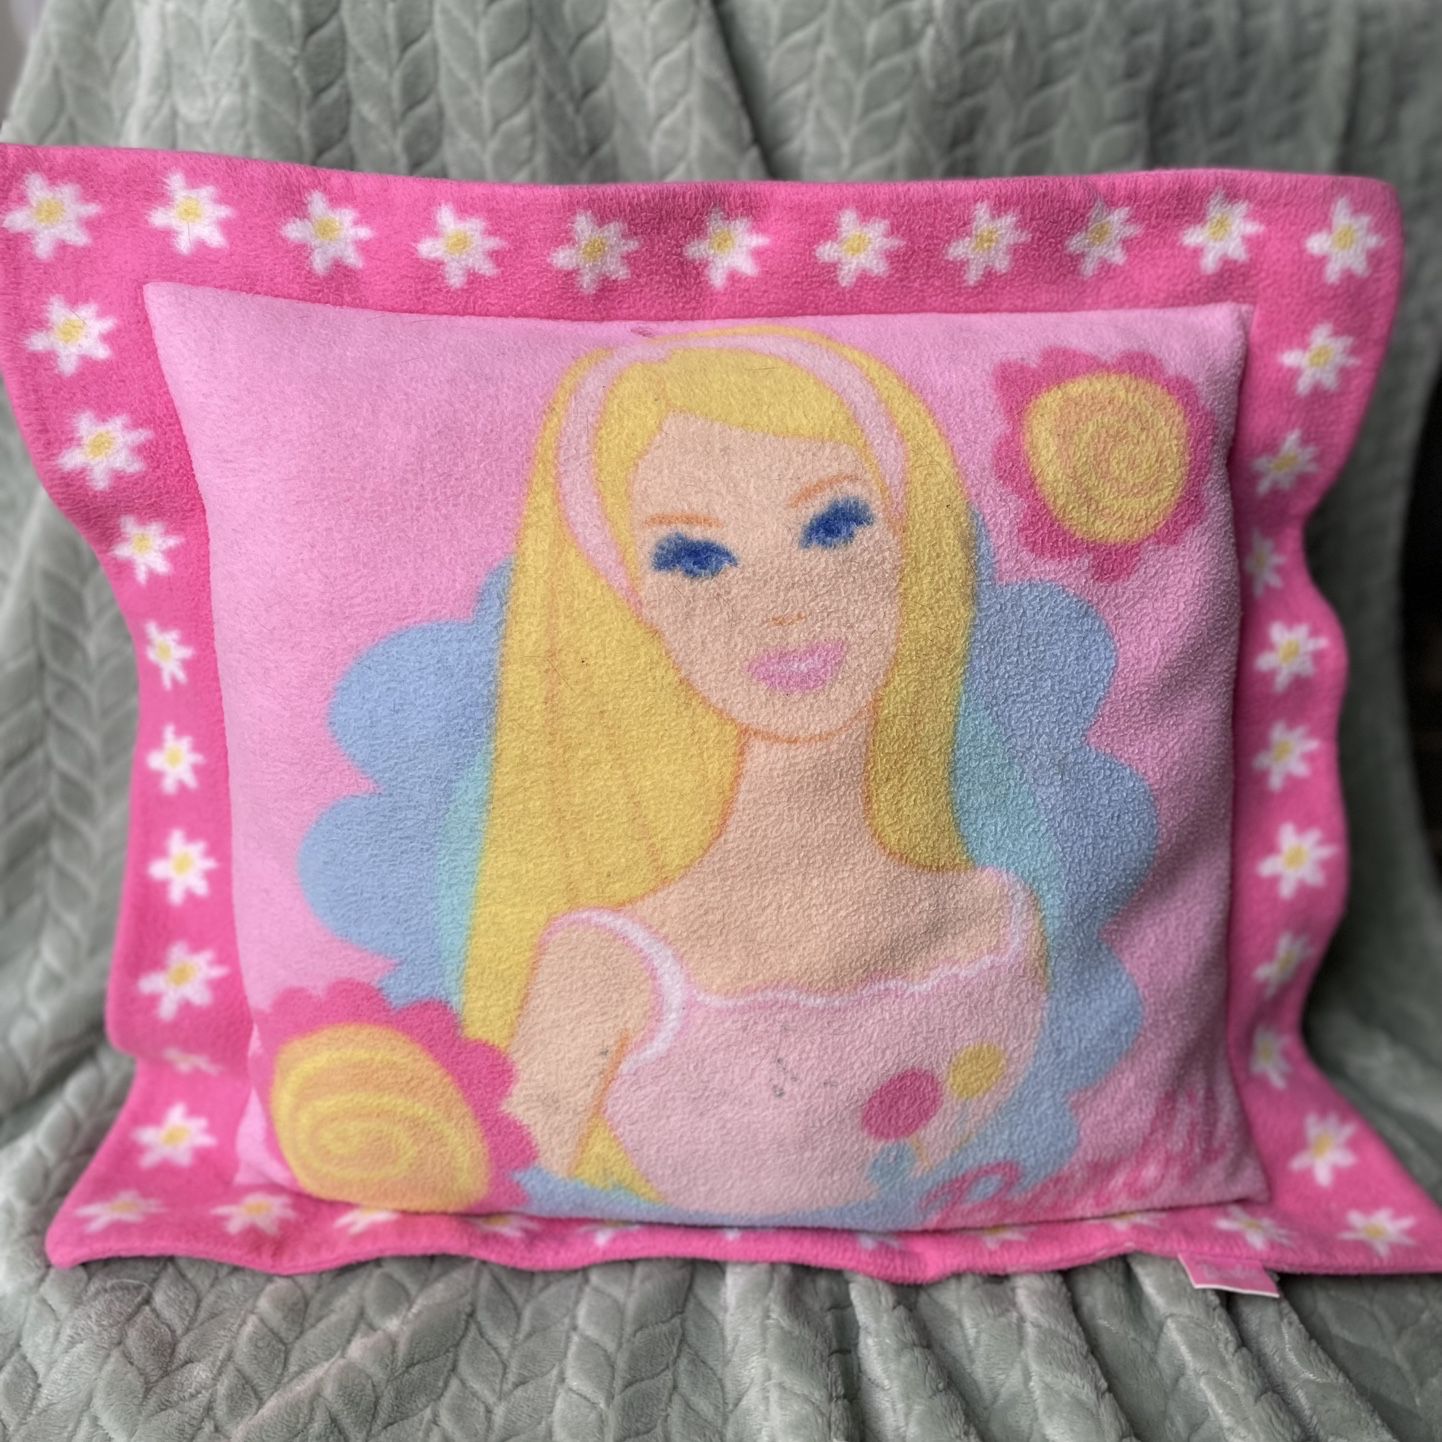 Early 2000's RARE Vintage Barbie Pillow 